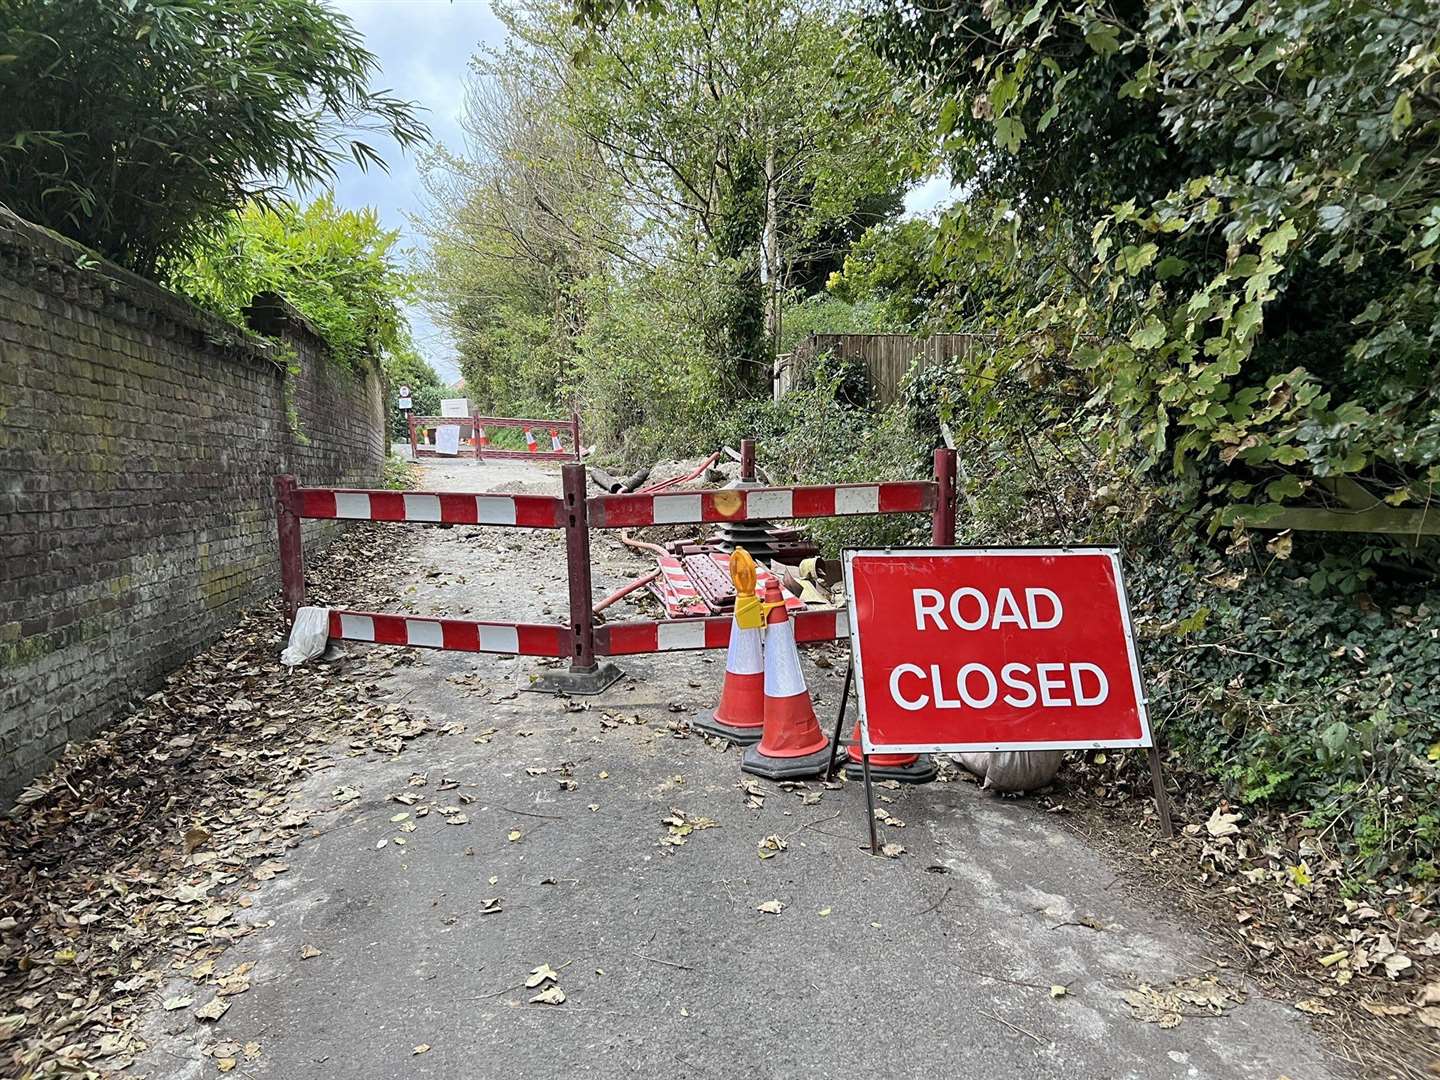 Pilgrims Way has been closed. Picture: UKNIP